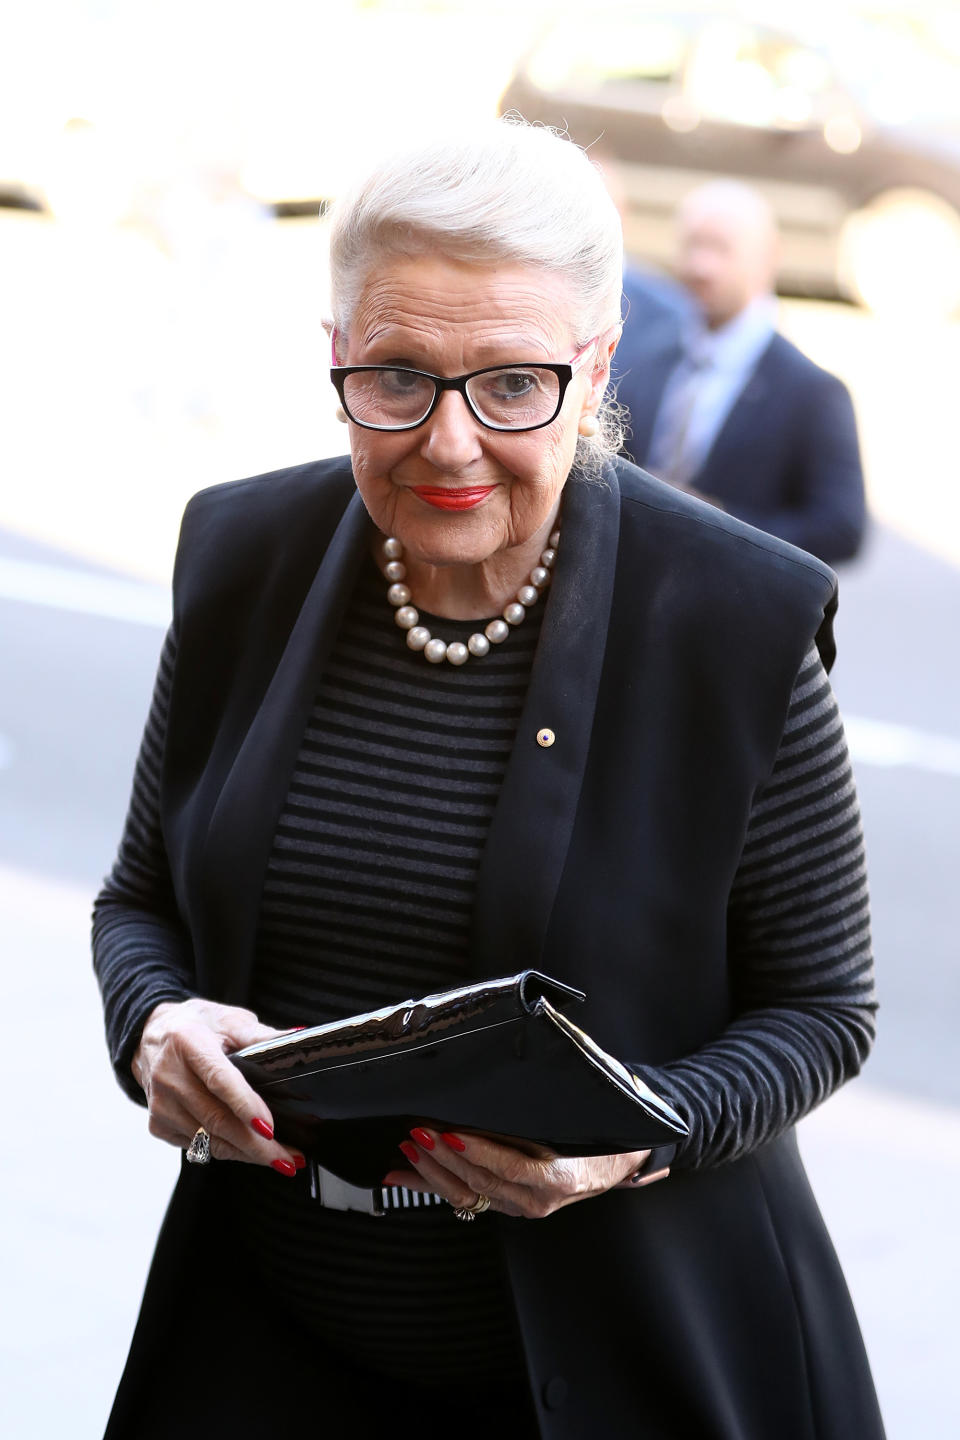 Bronwyn Bishop attends the State Funeral for Carla Zampatti at St Mary's Cathedral on April 15, 2021 in Sydney, Australia.